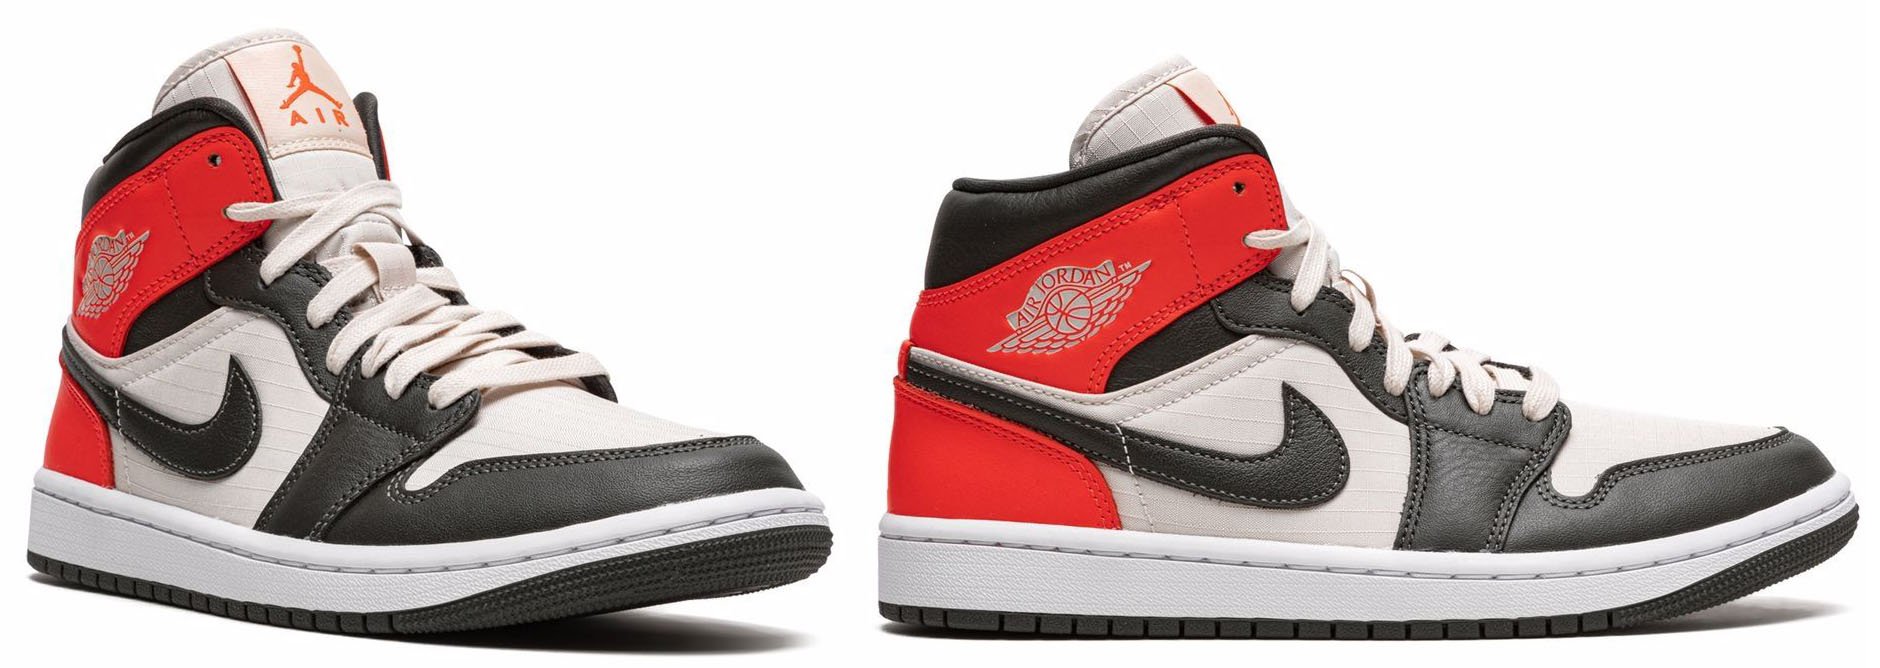 This red, black, and white Air Jordan Mid SE features a subtle grid pattern, finished with the iconic Air Jordan Wings logo and signature Swoosh logo detail